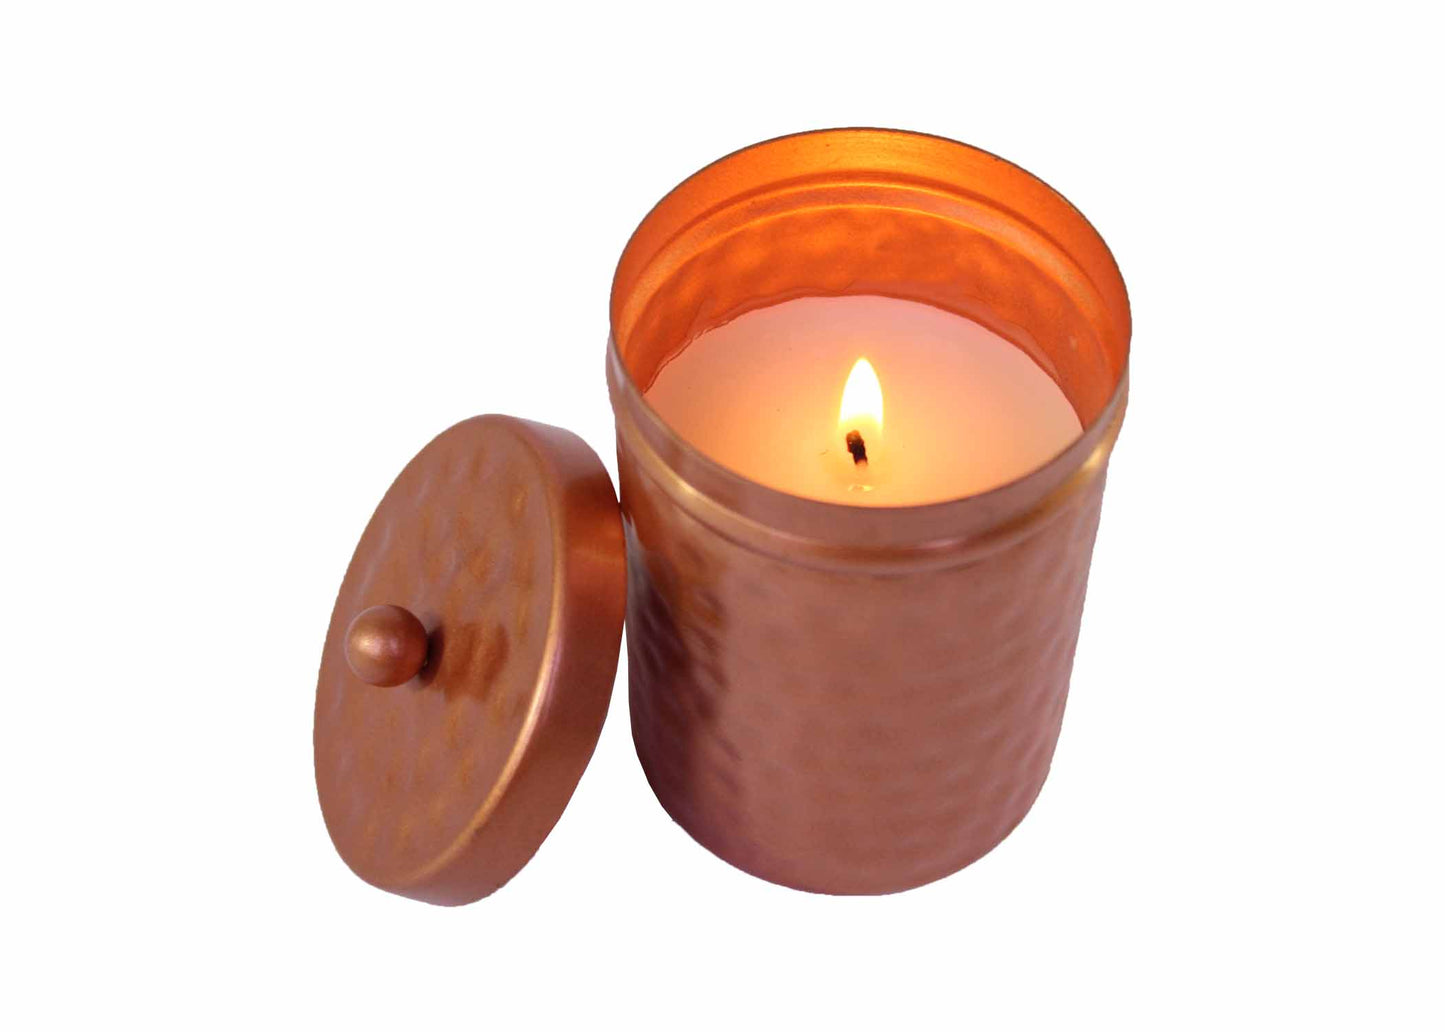 Hosley Scented Metal Jar Candles For Home Decoration, Festival, Diwali Candles,Highly Scented & Long Lasting